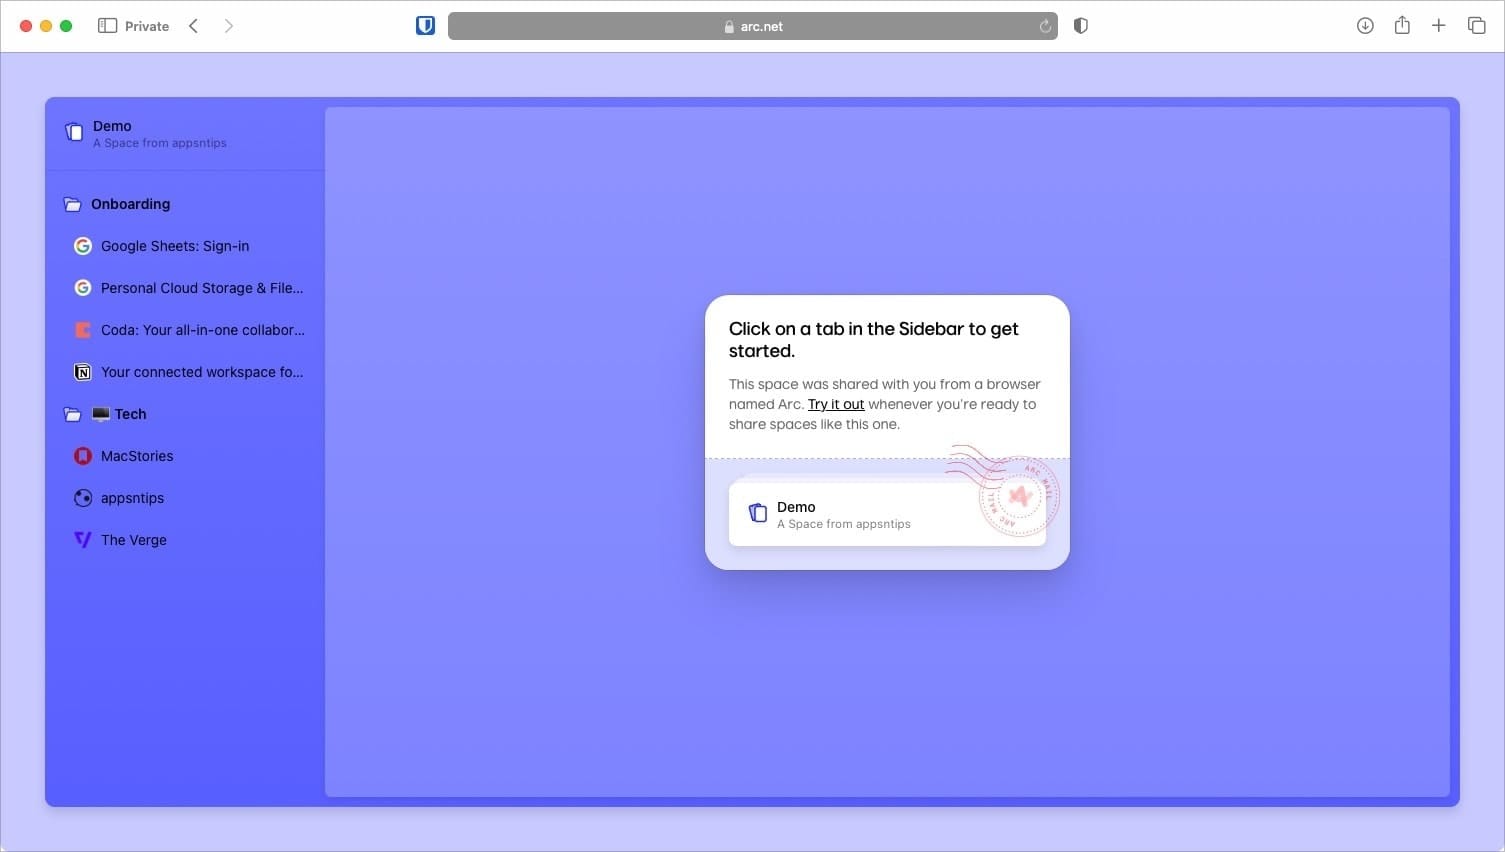 Arc browser shared space opened in Safari